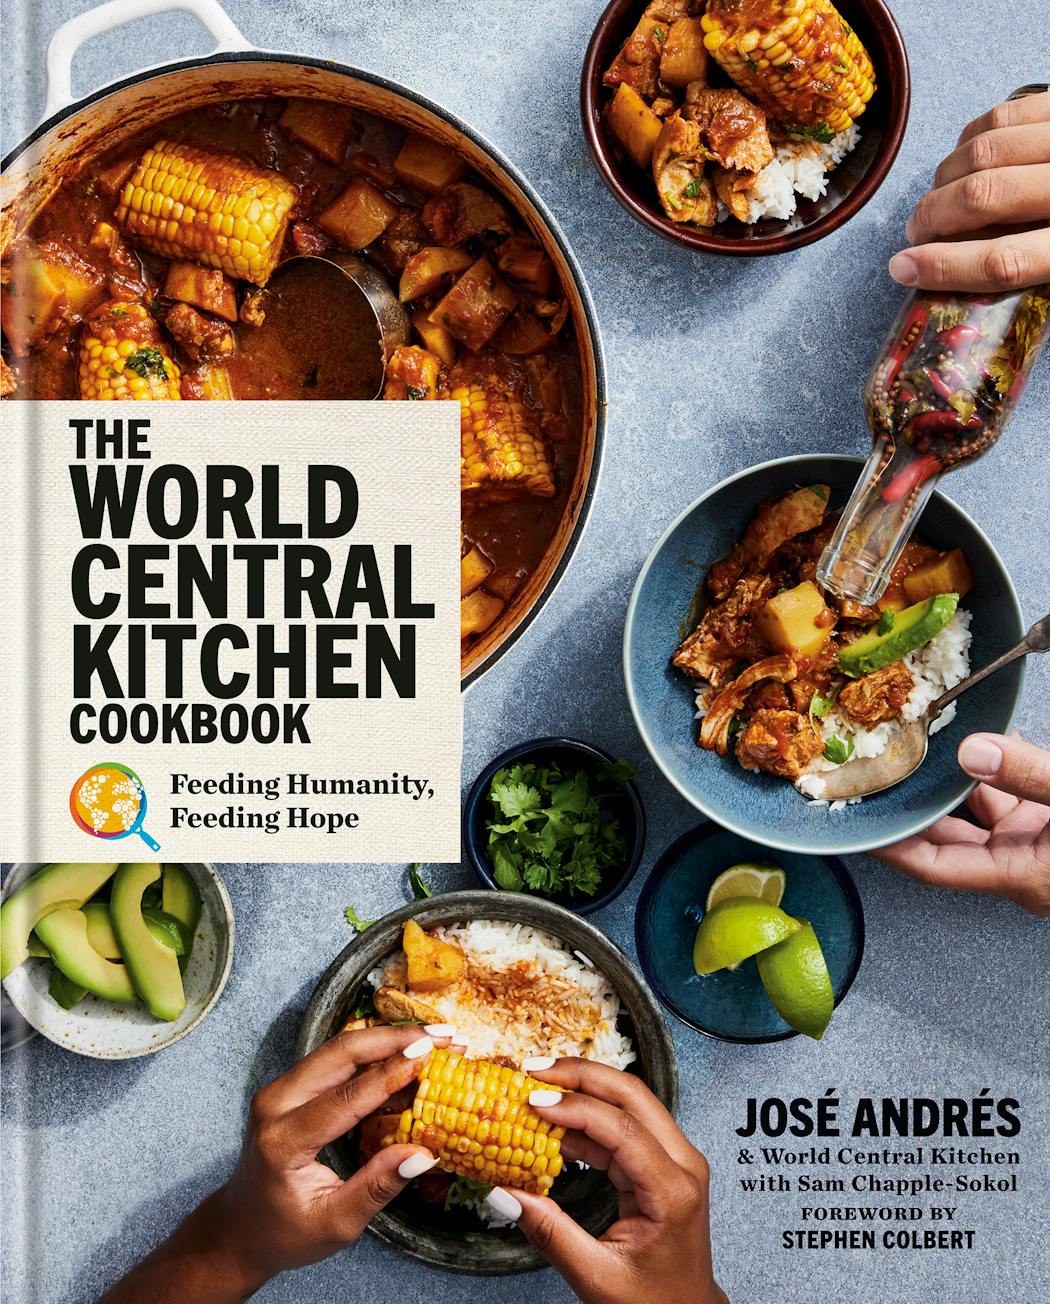 The author’s proceeds will go back to World Central Kitchen, the nonprofit he started.